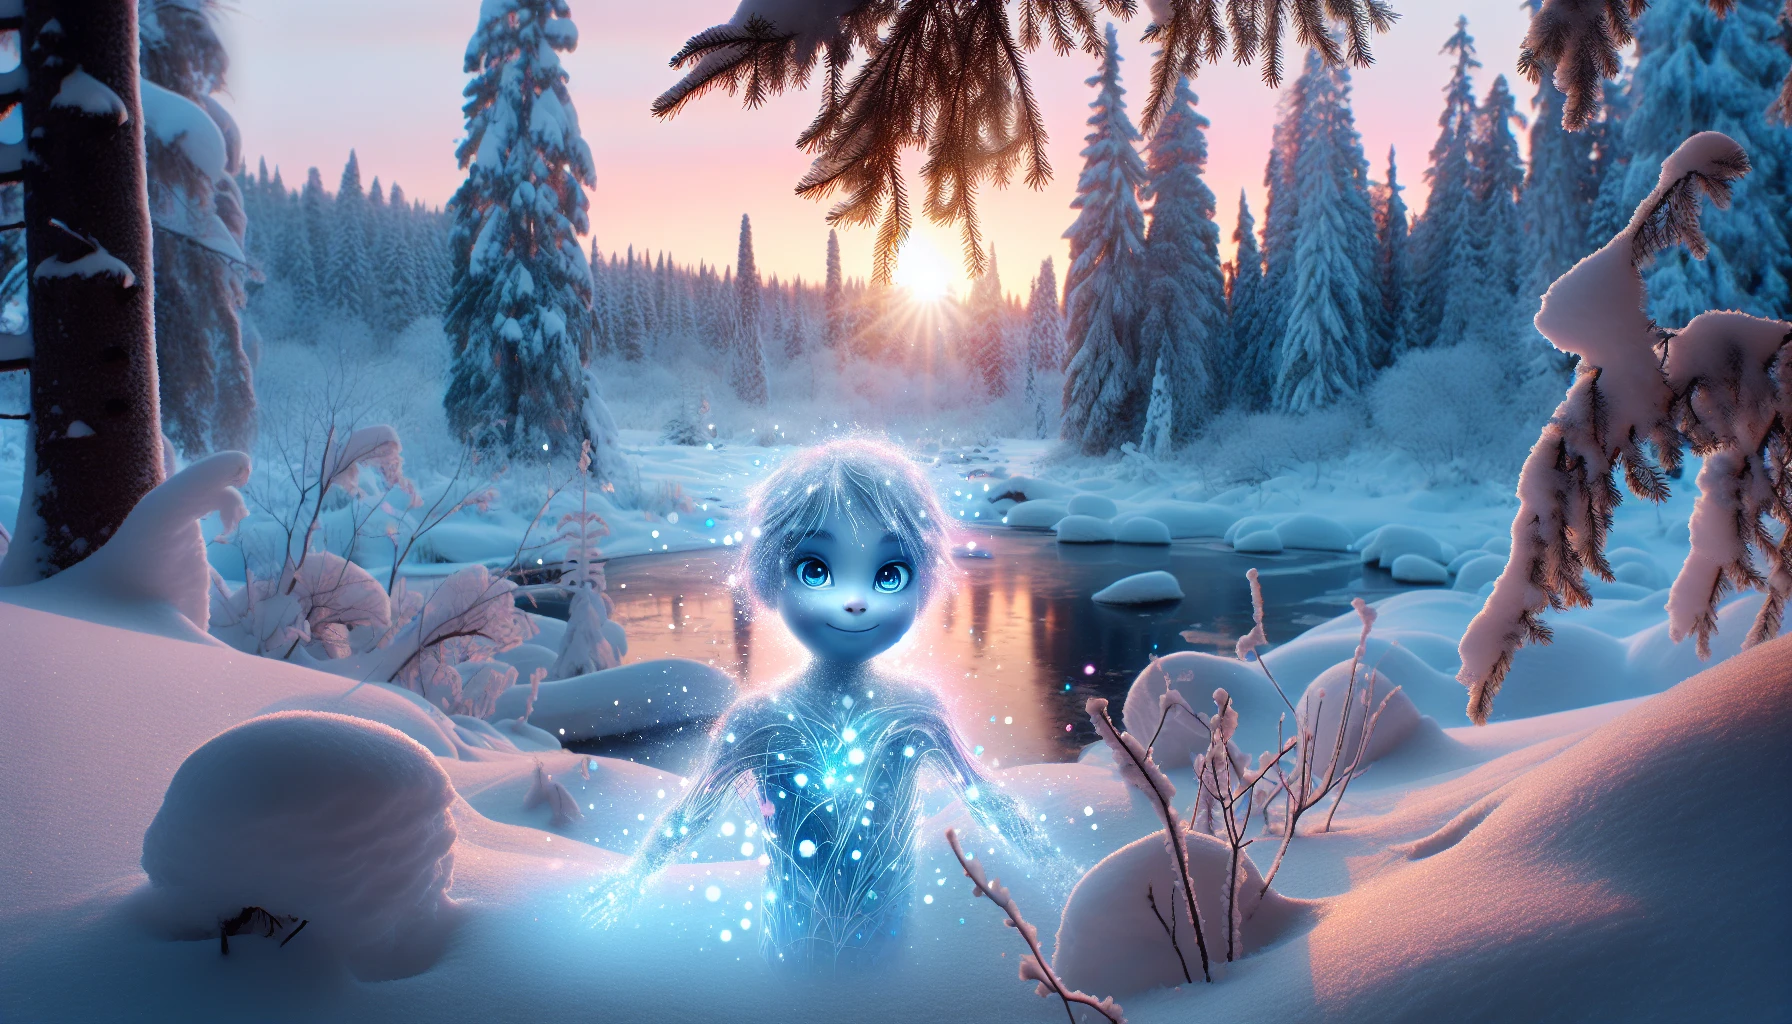 The Enigma of the Snow Child: A magical snow child coming to life in a wintry landscape